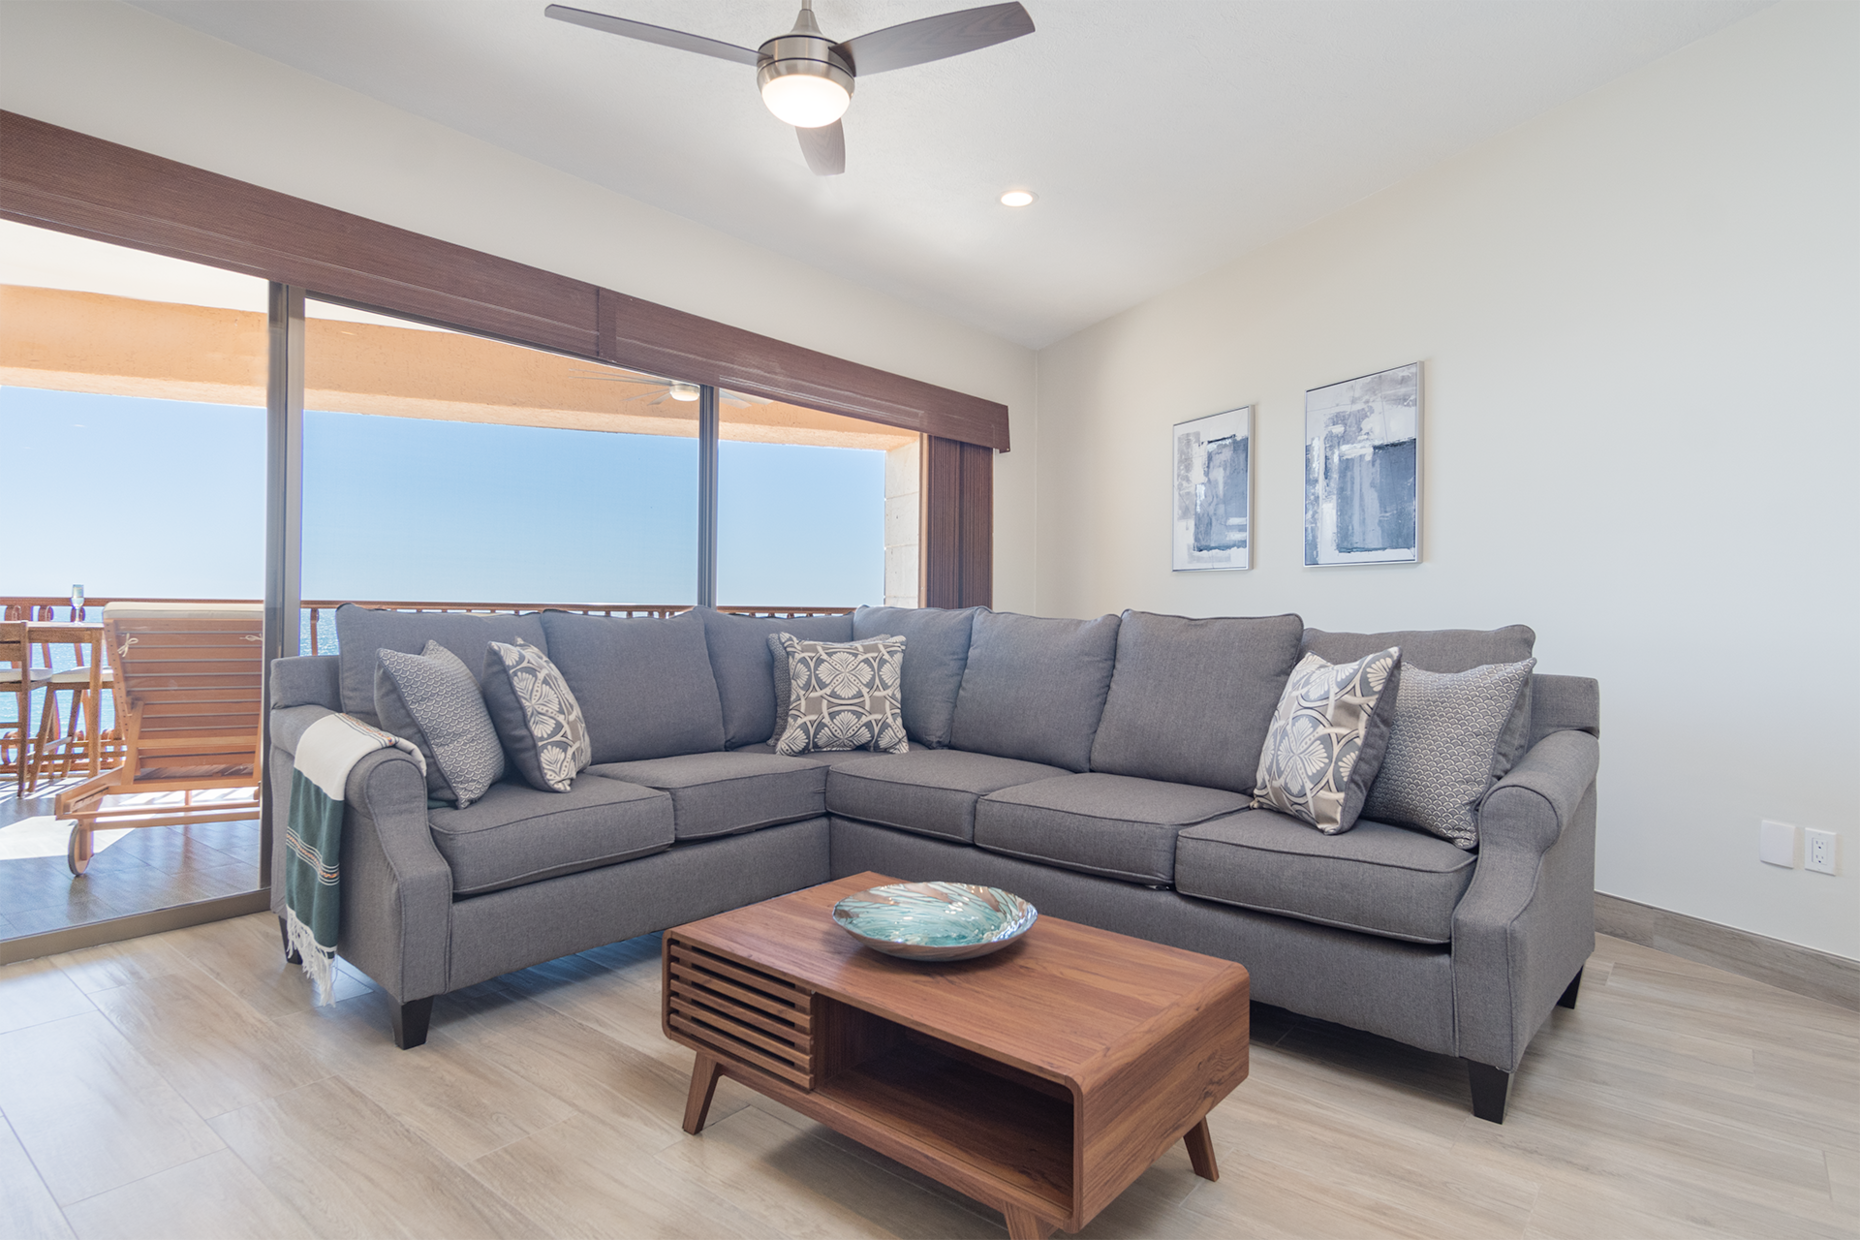 The Living room is set on the ocean side of the unit.